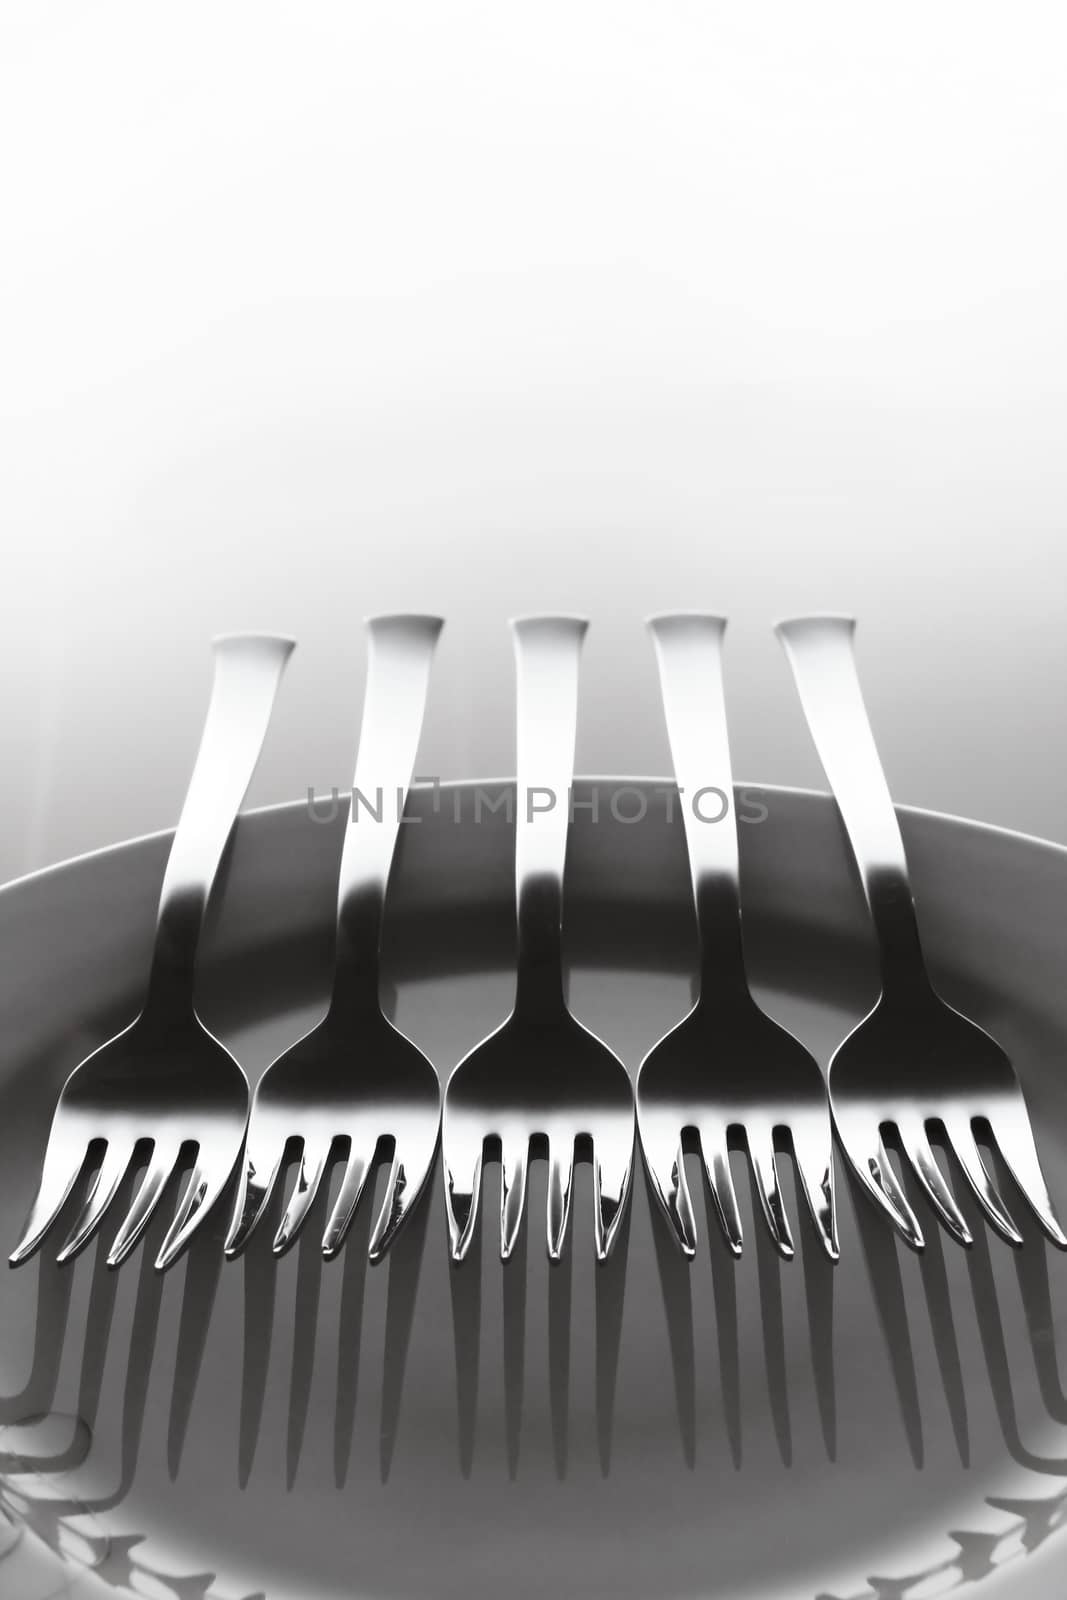 Background of five forks aligned over a dish